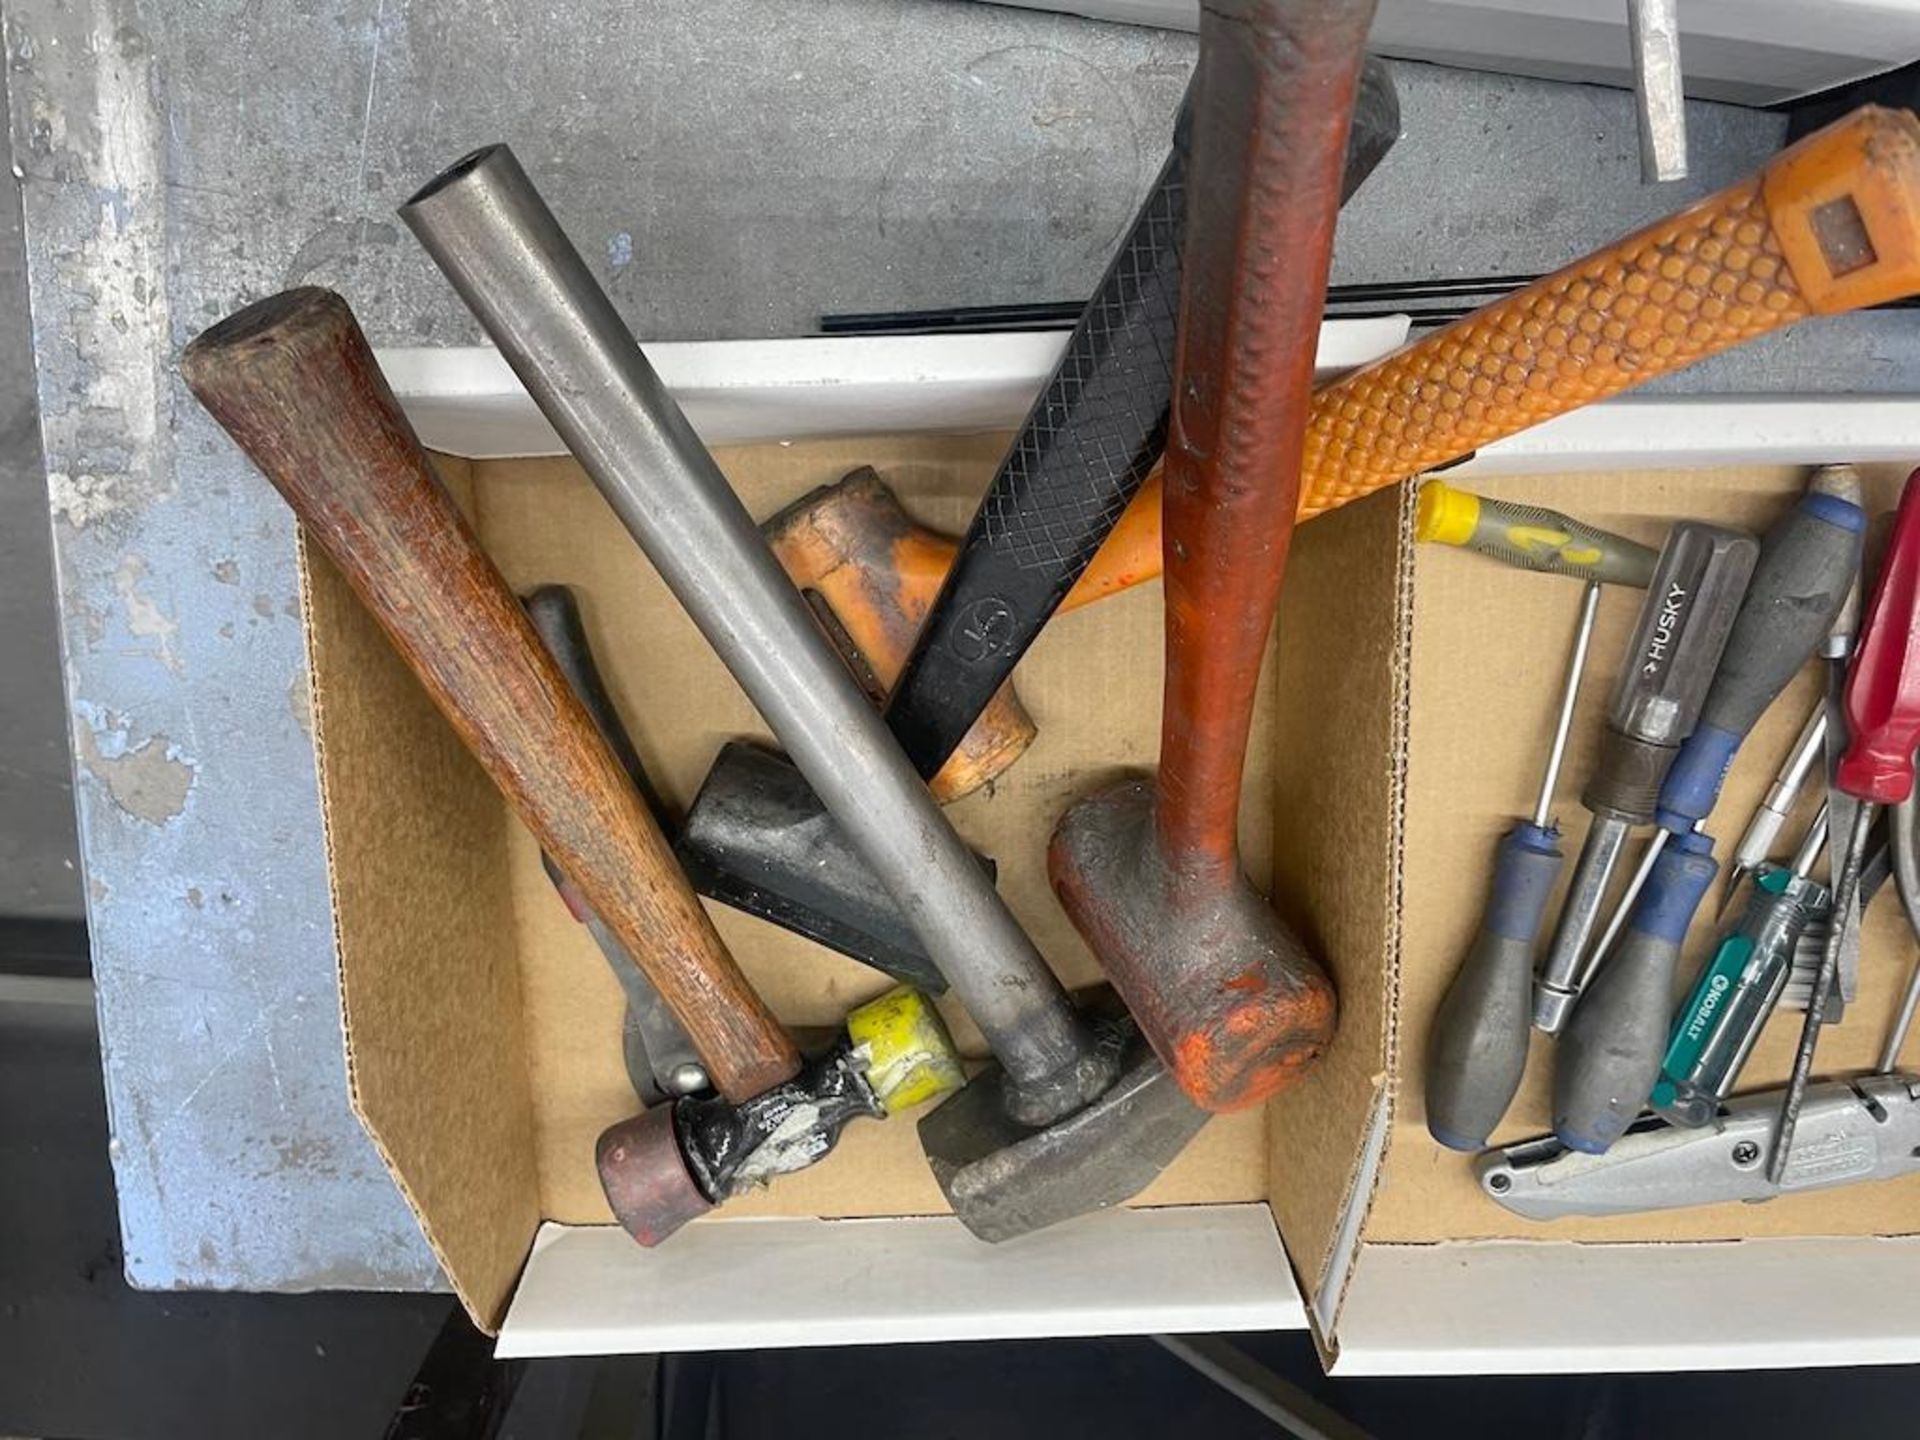 ASSORTED HAND TOOLS, PNEUMATIC, GLOVES, TAPE DISPENSERS, HEIGHT GAUGE, PLUNGER CANS, W 3 HD STEEL - Image 15 of 16